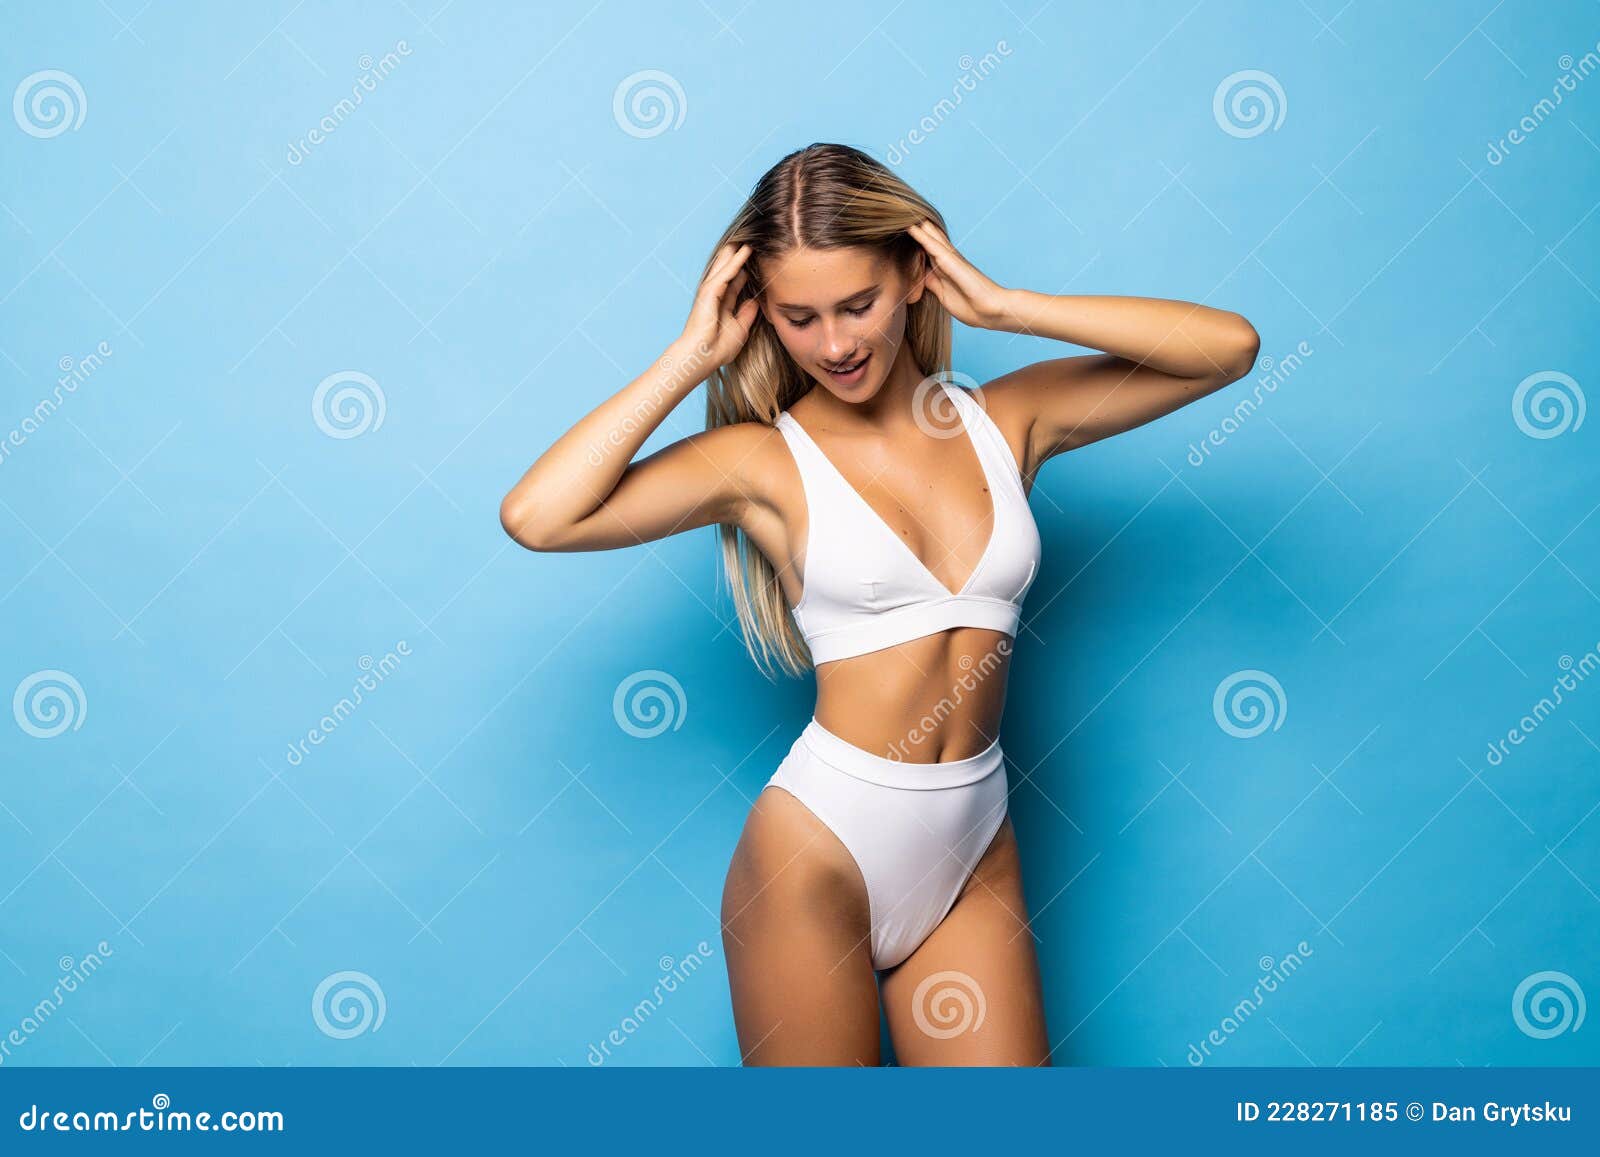 Front view of a fit and young girl dressed in blue underwear